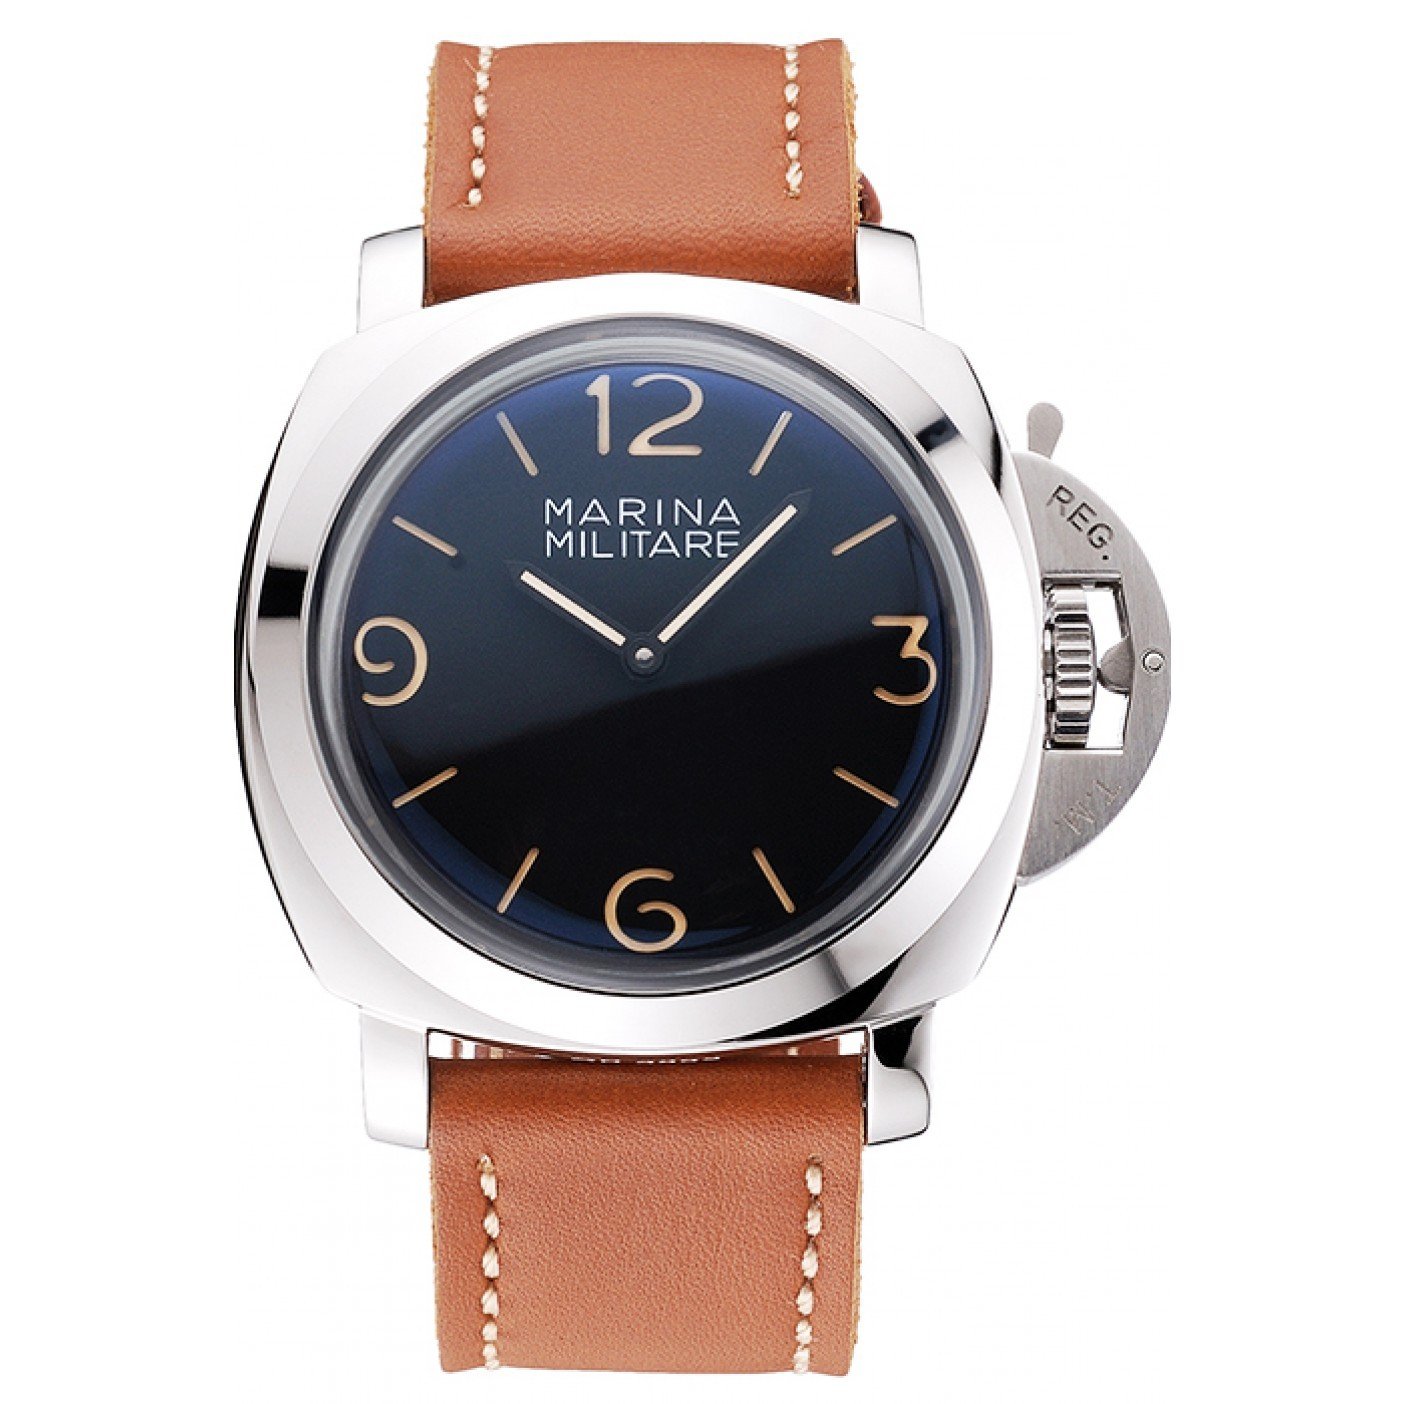 Panerai Radiomir Brushed Stainless Steel Case Black Dial Brown Leather Strap